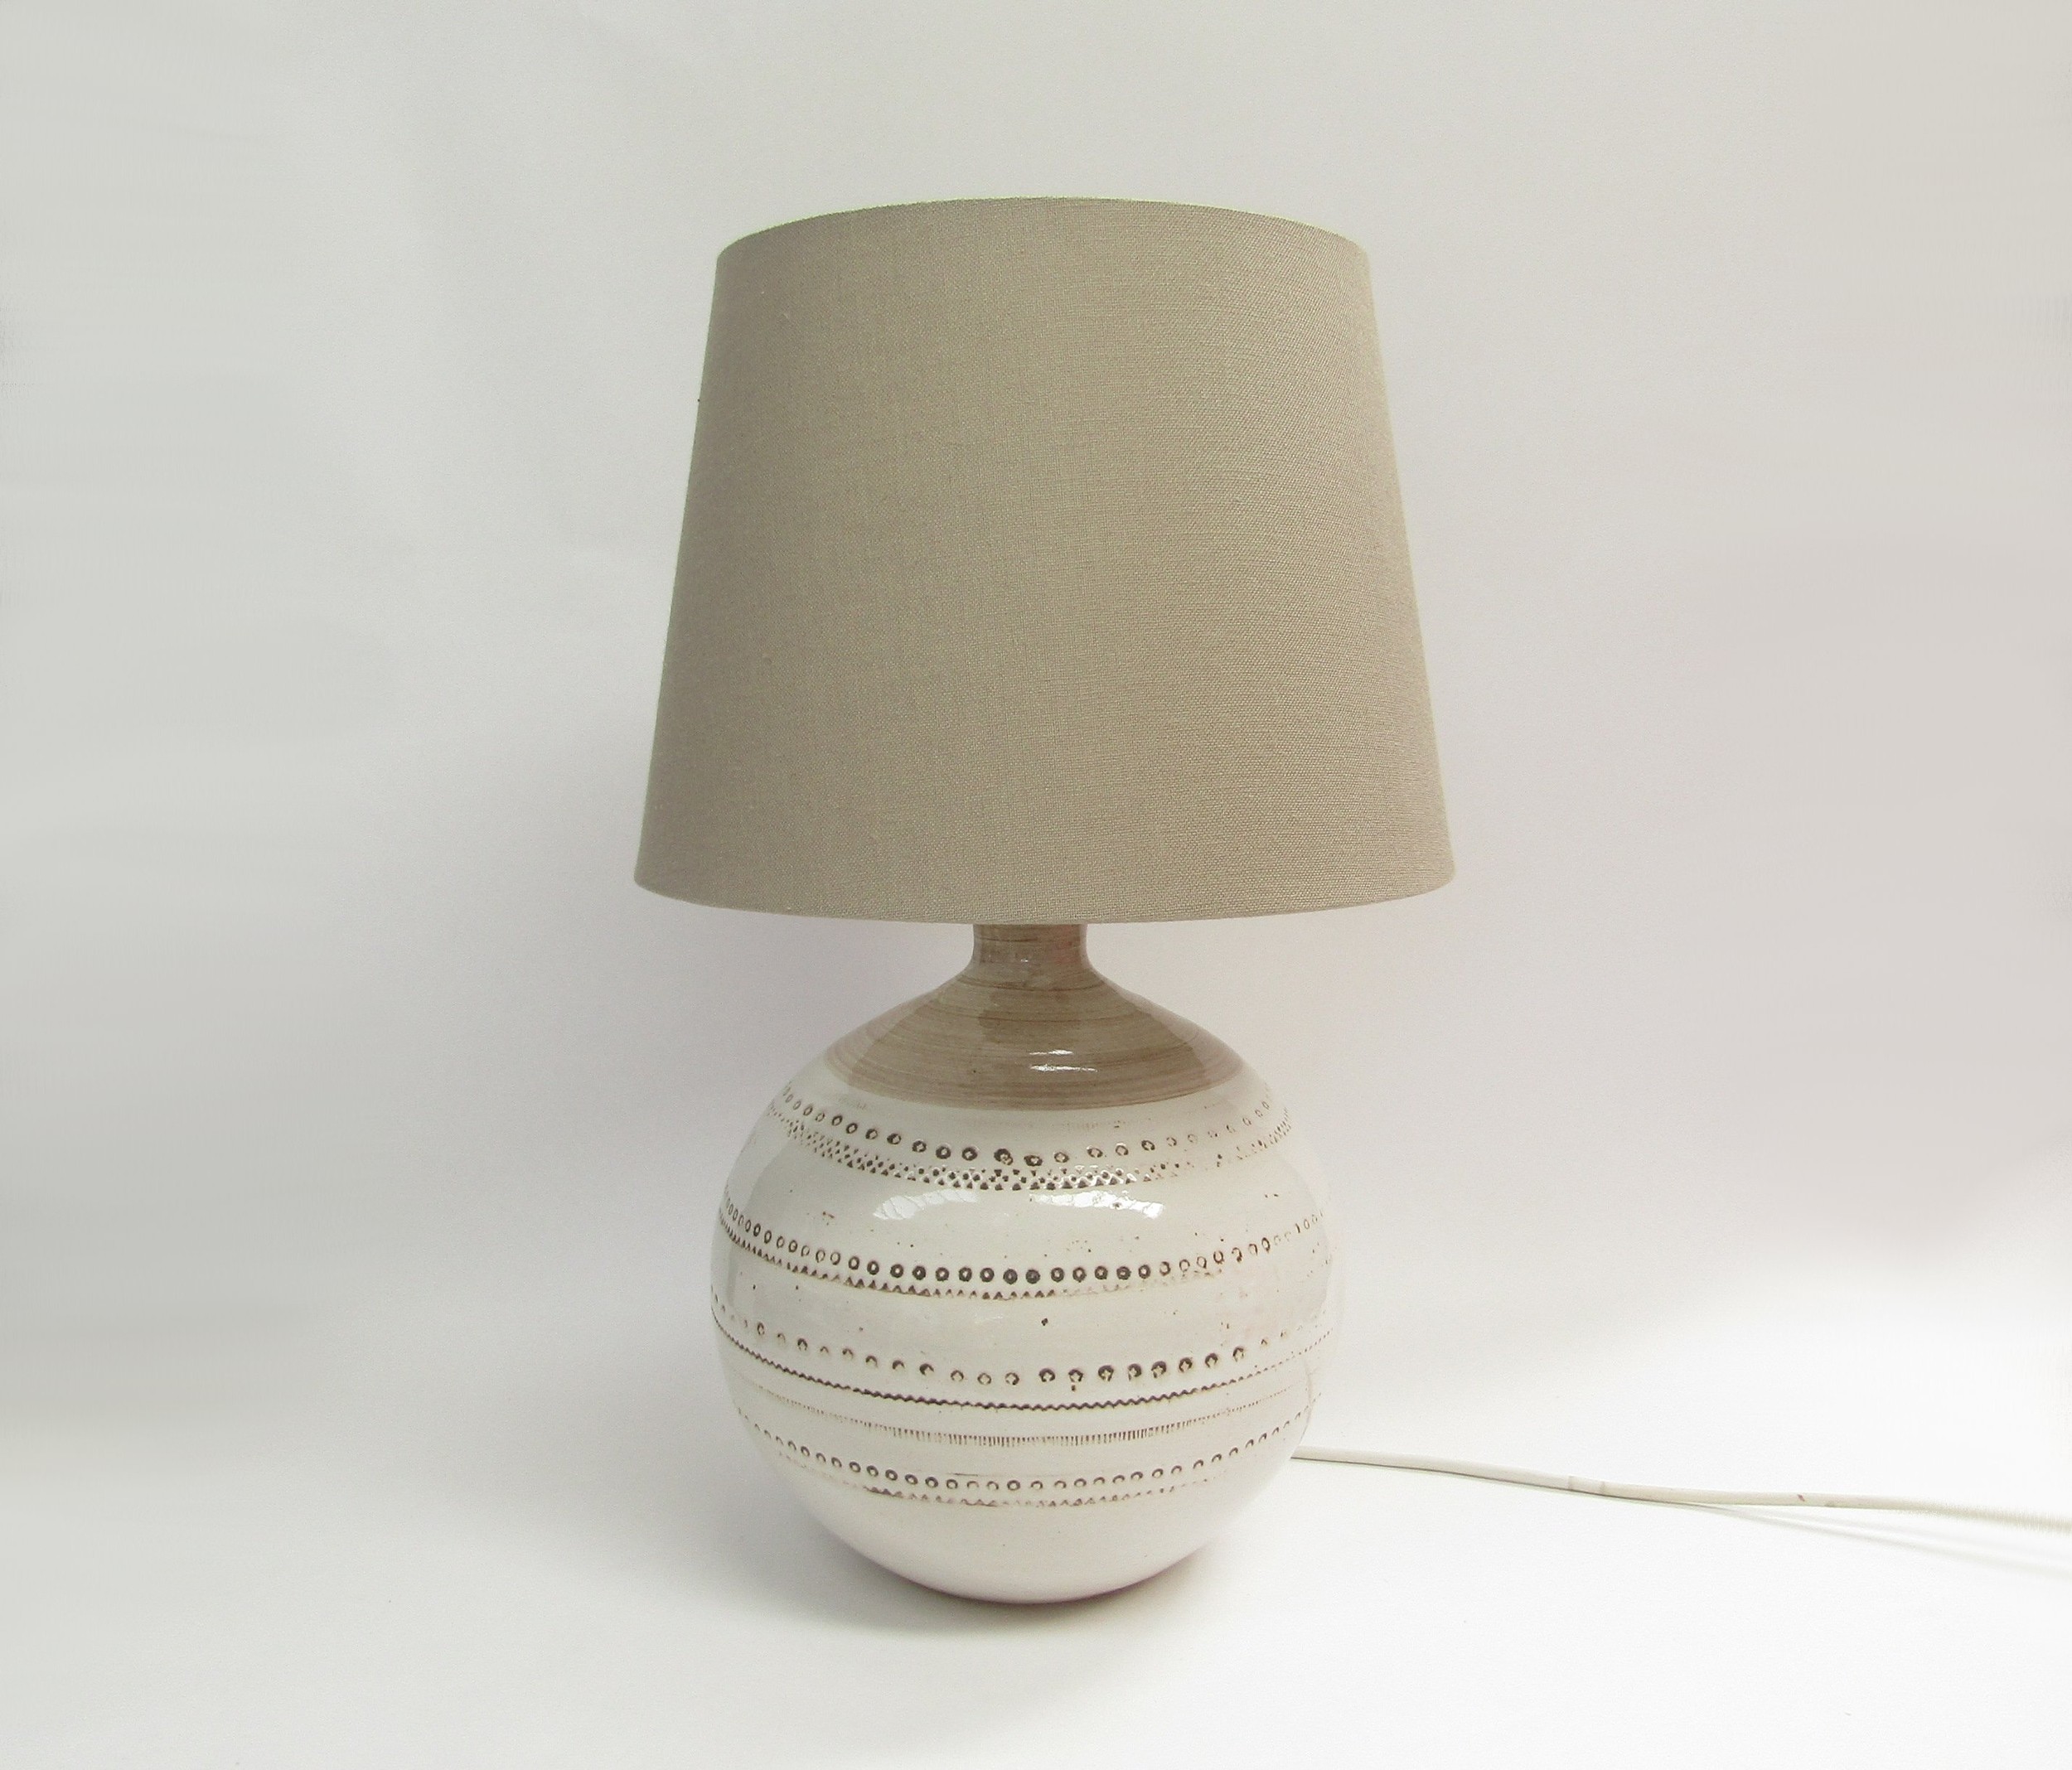 A Bitossi lamp base in white with impressed motifs (possibly made for Pier UK) with shade. Base 30cm